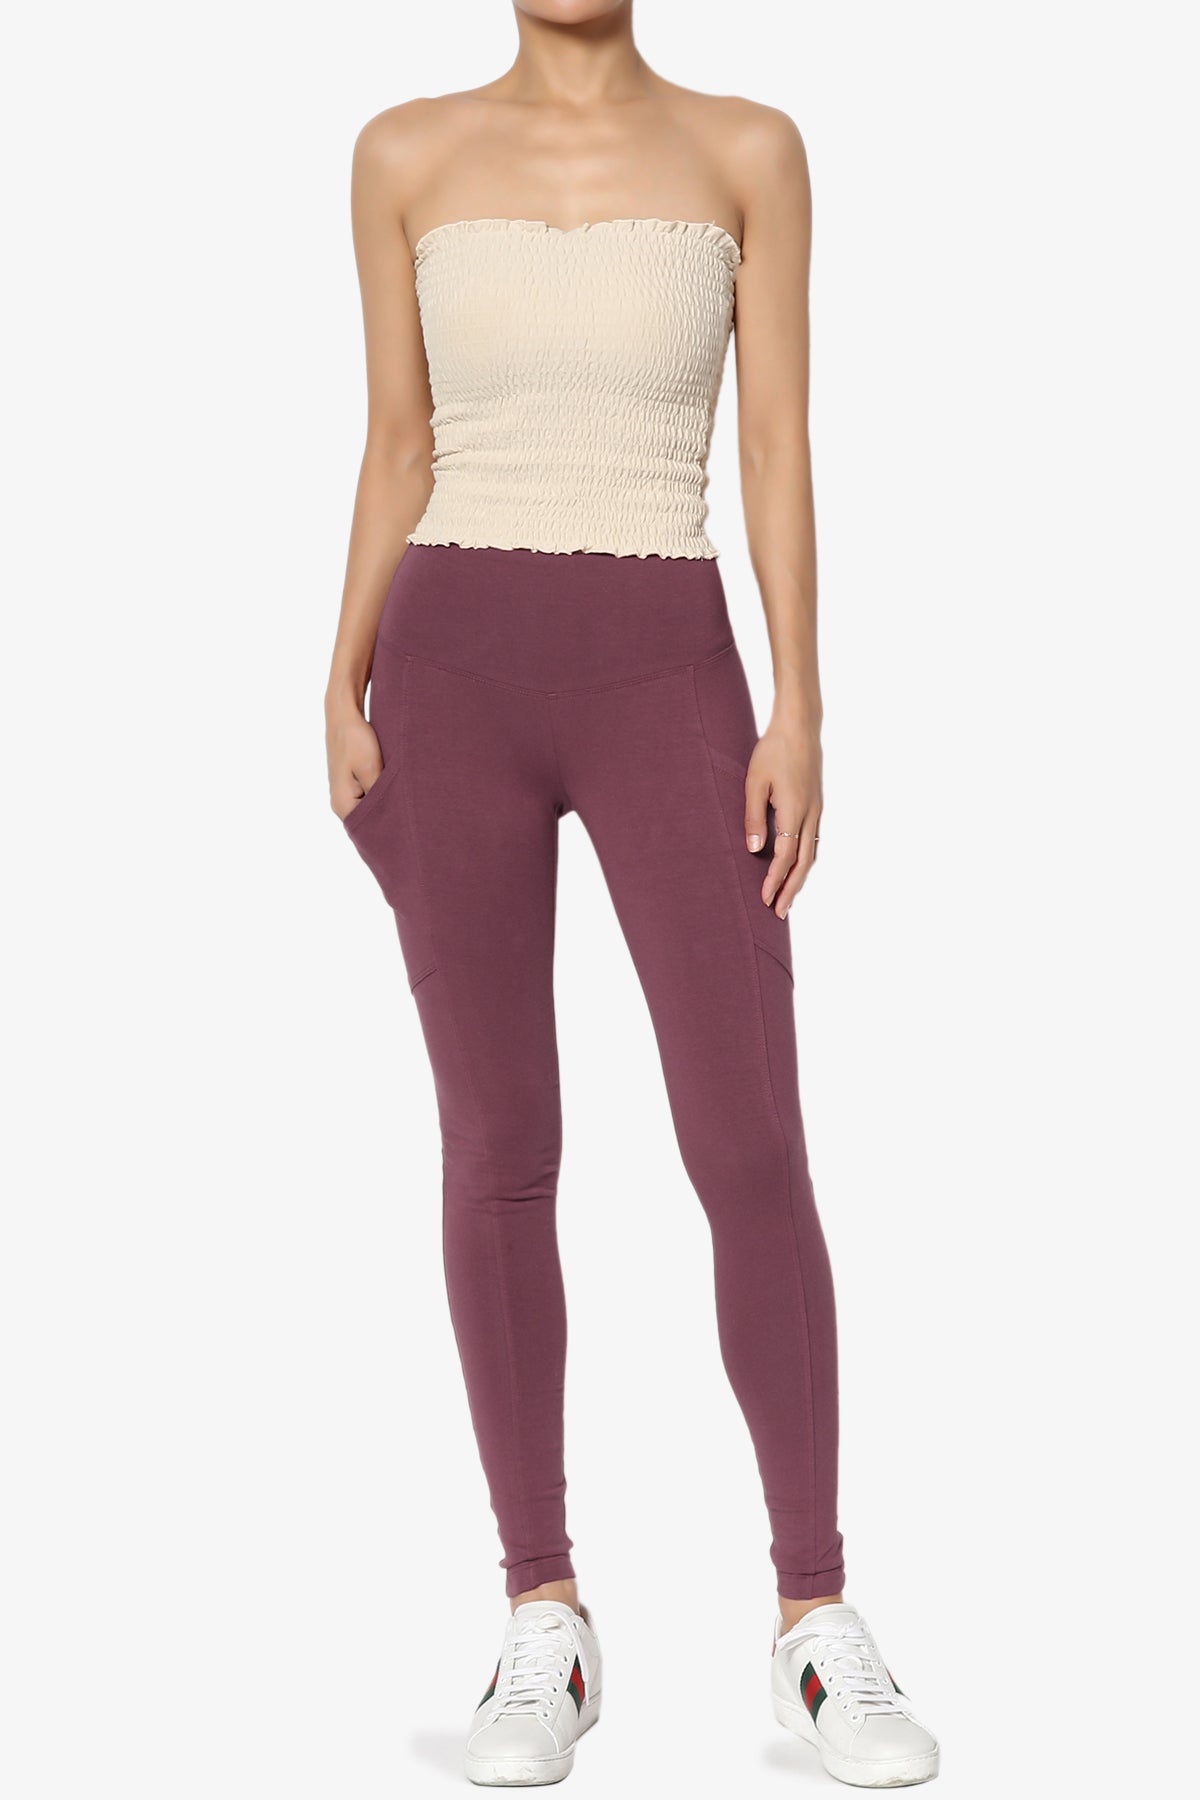 Ansley Luxe Cotton Leggings with Pockets DUSTY PLUM_6